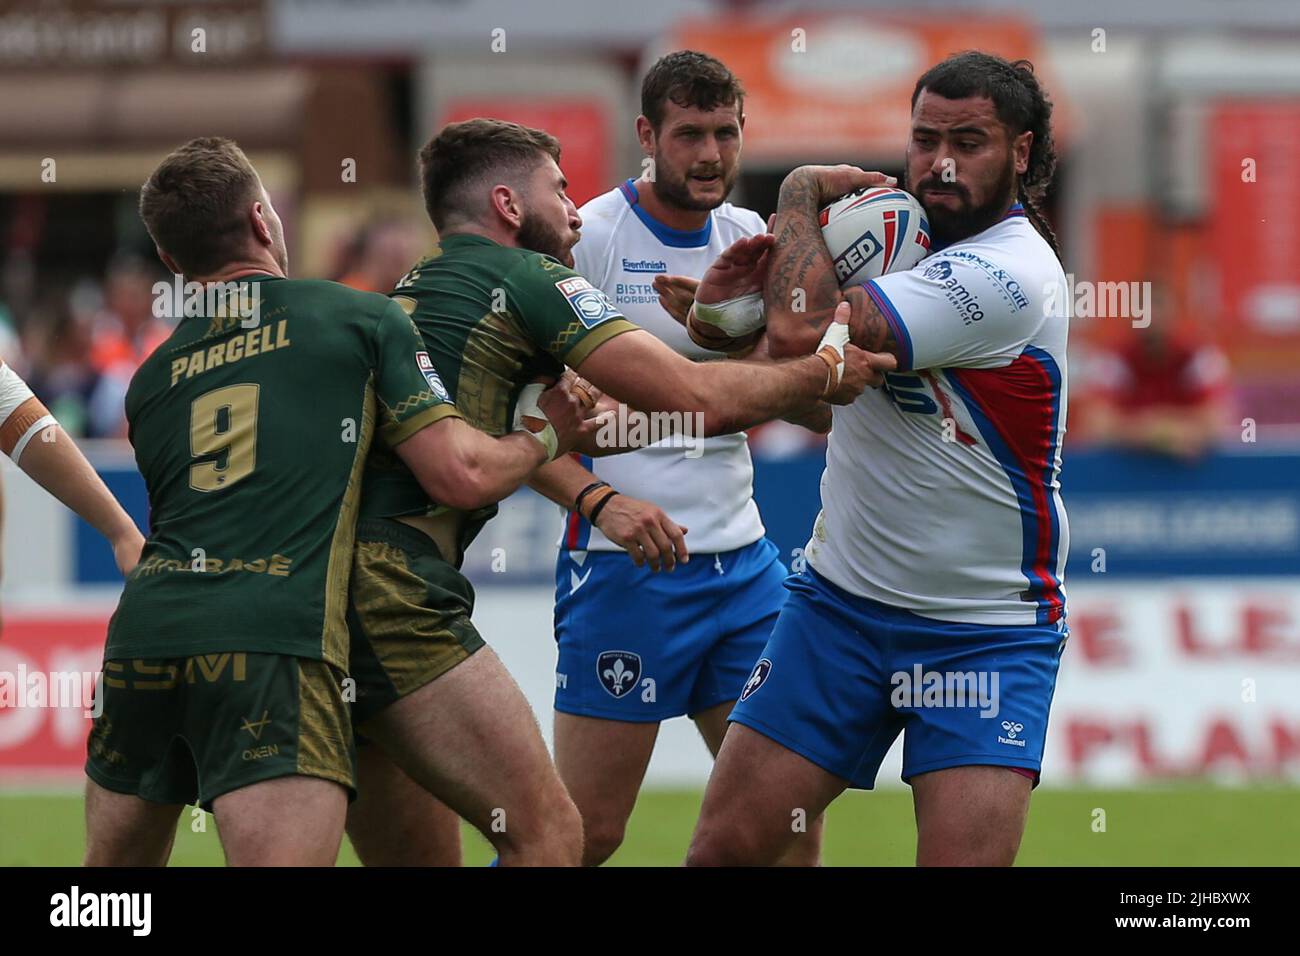 David Fifita #35 of Wakefield Trinity is tackled by Sam Royle #35 of Hull KR Stock Photo